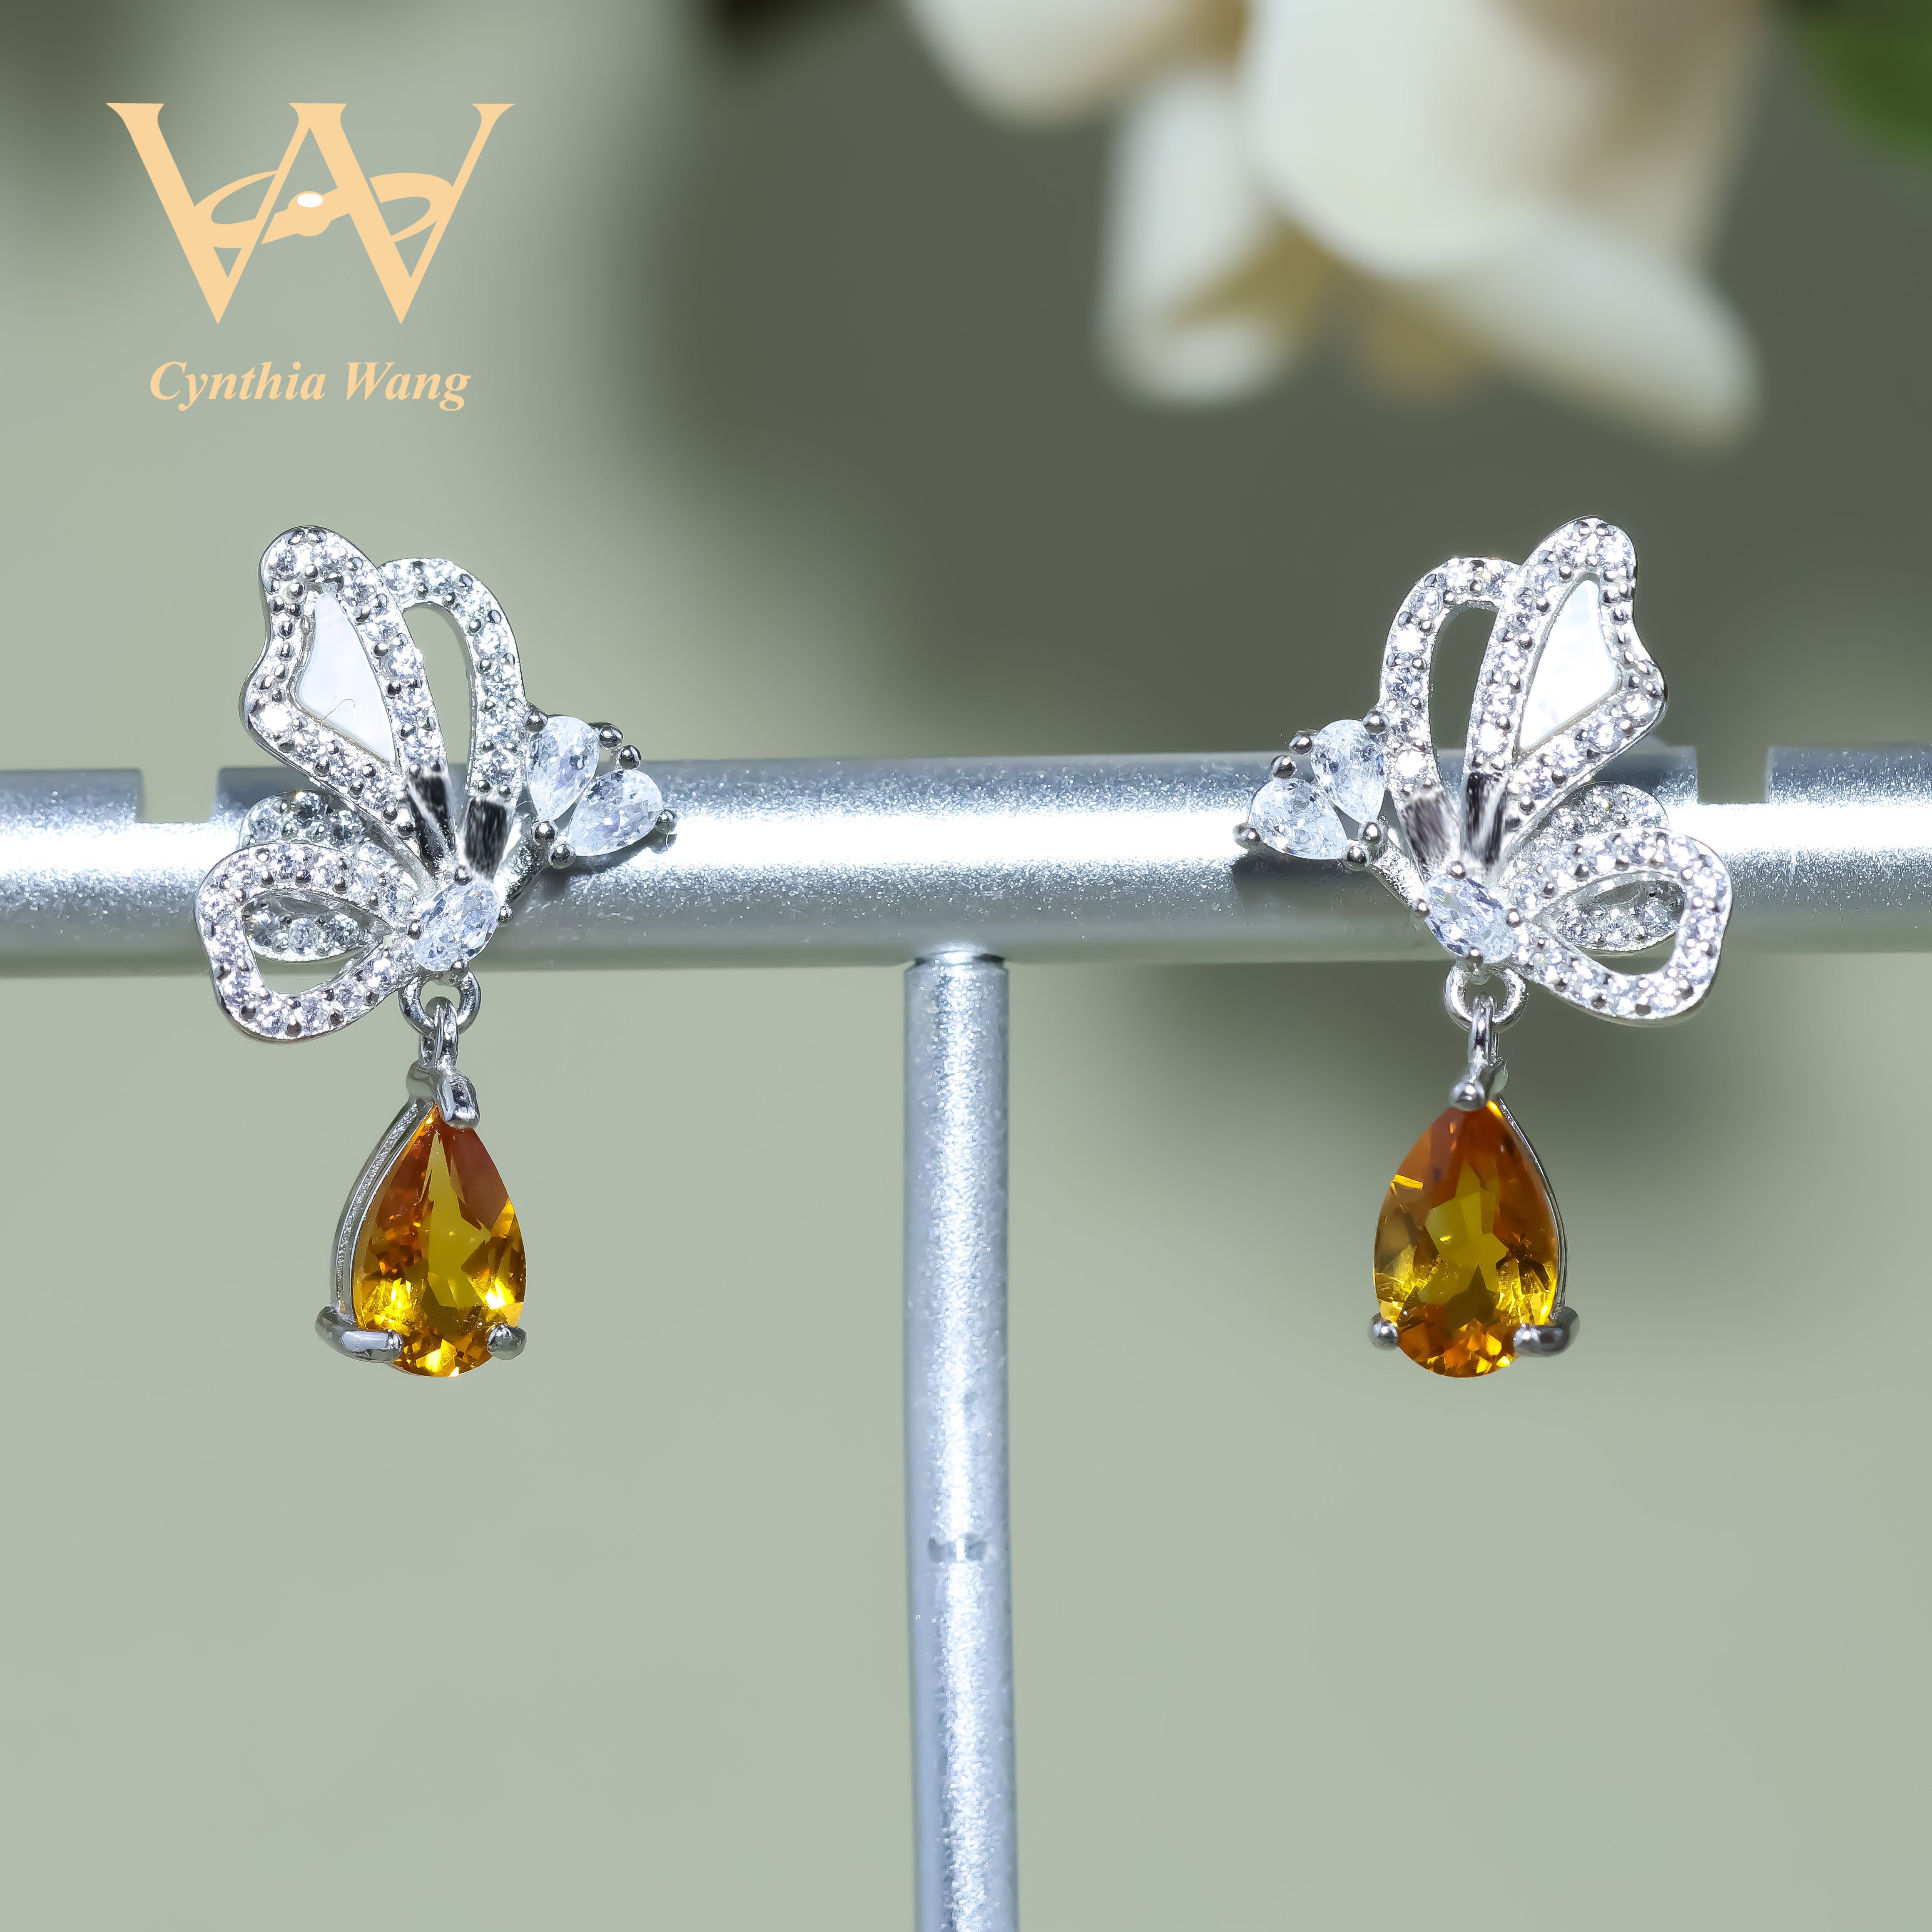 'The Butterfly's Love Song' Citrine Earrings